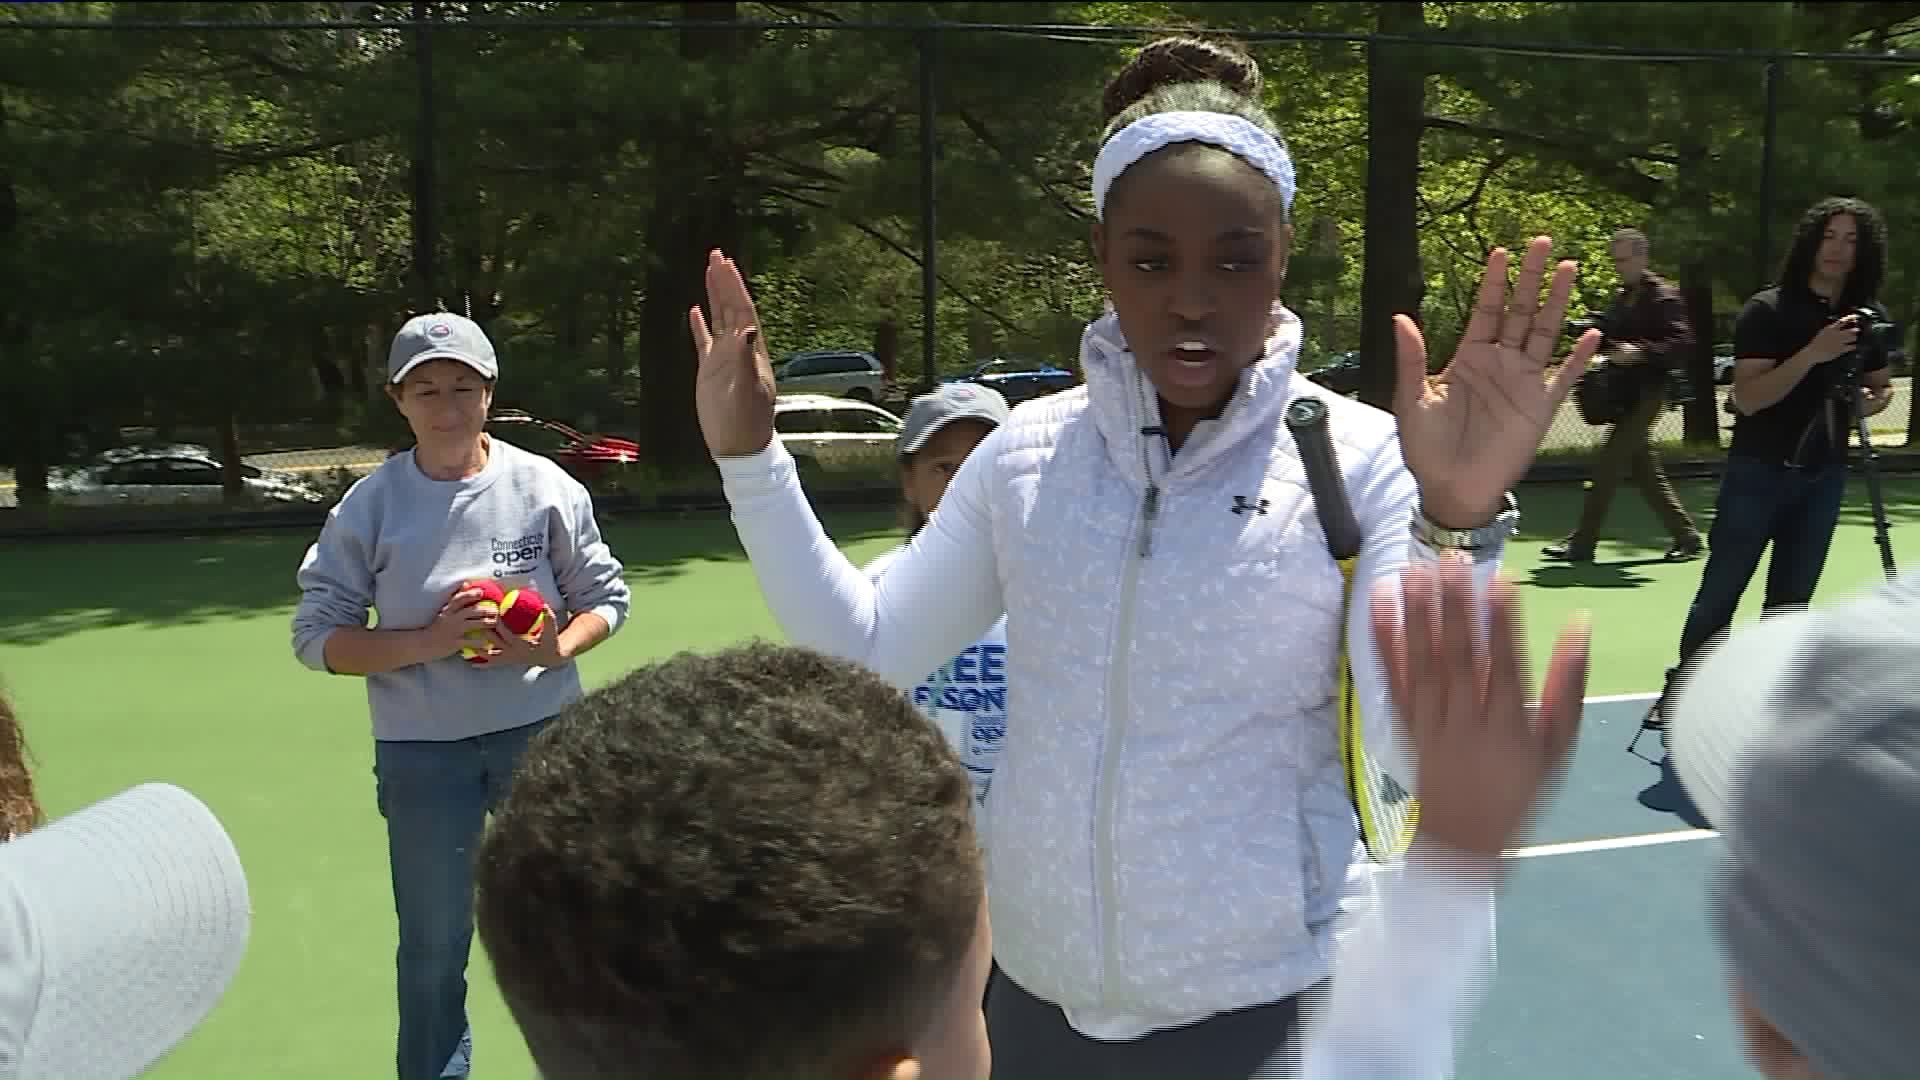 Professional tennis player gives free lessons to students in New Haven